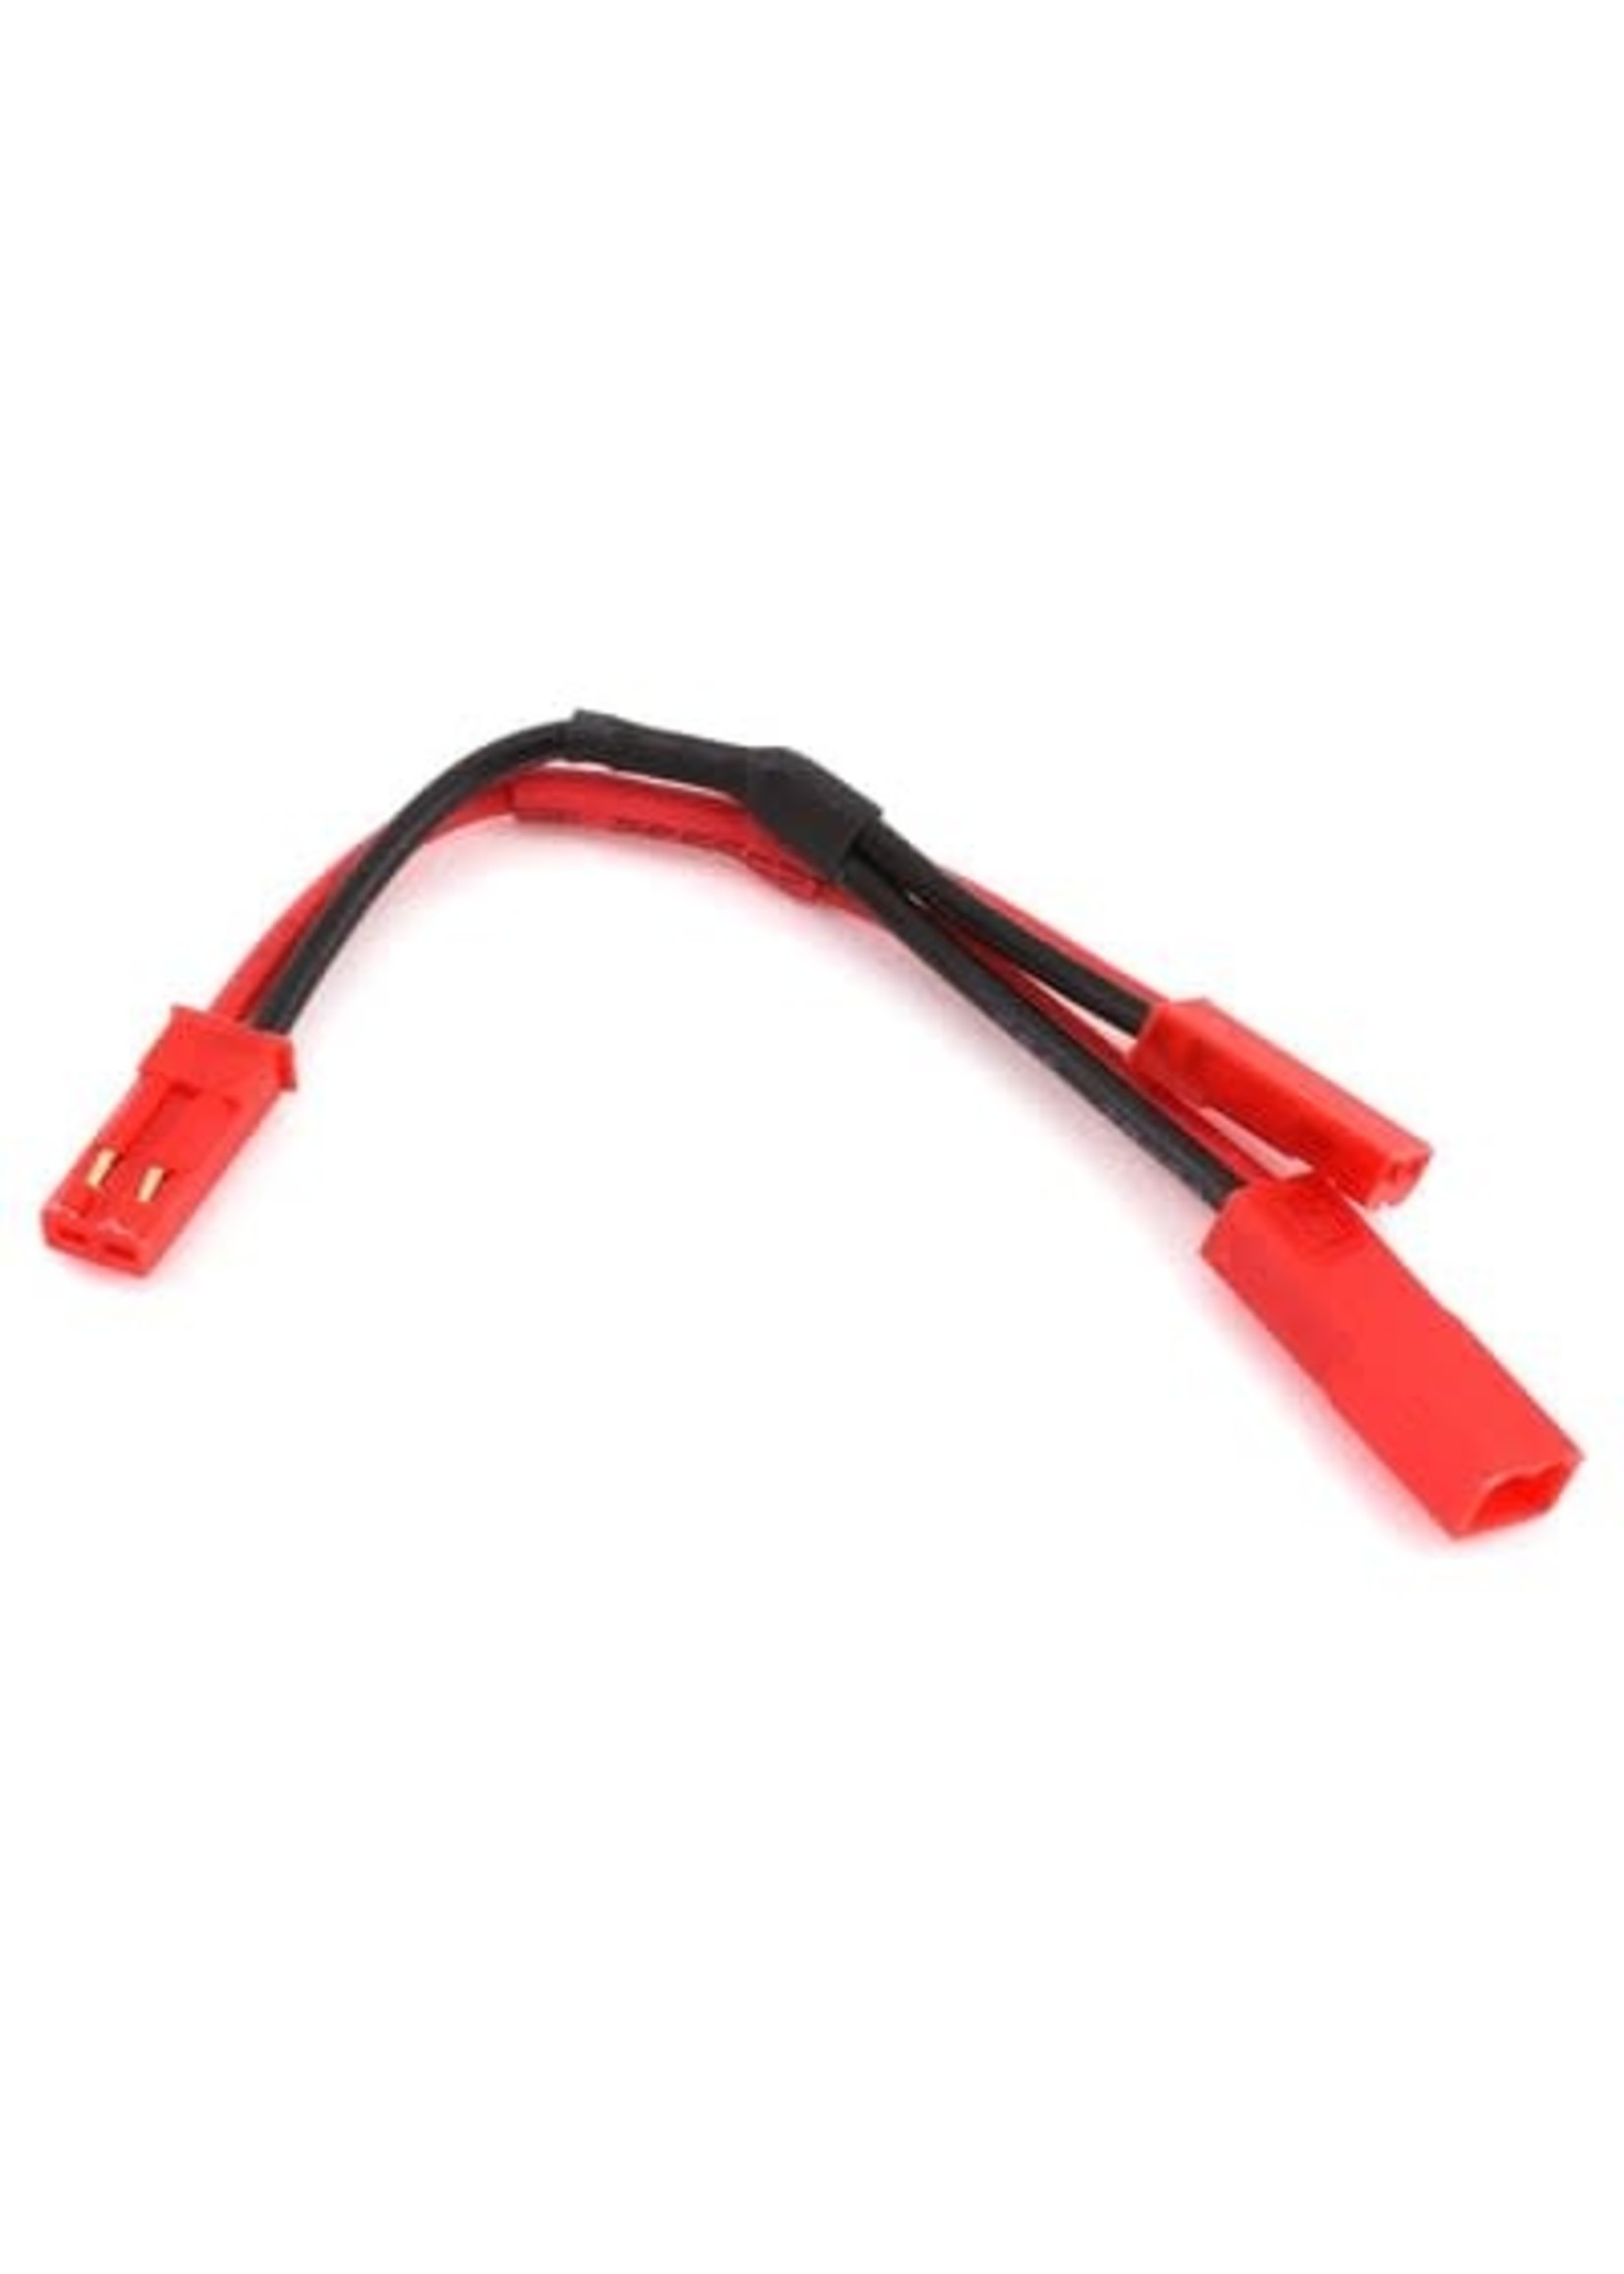 Traxxas 2261 Y-harness, BEC